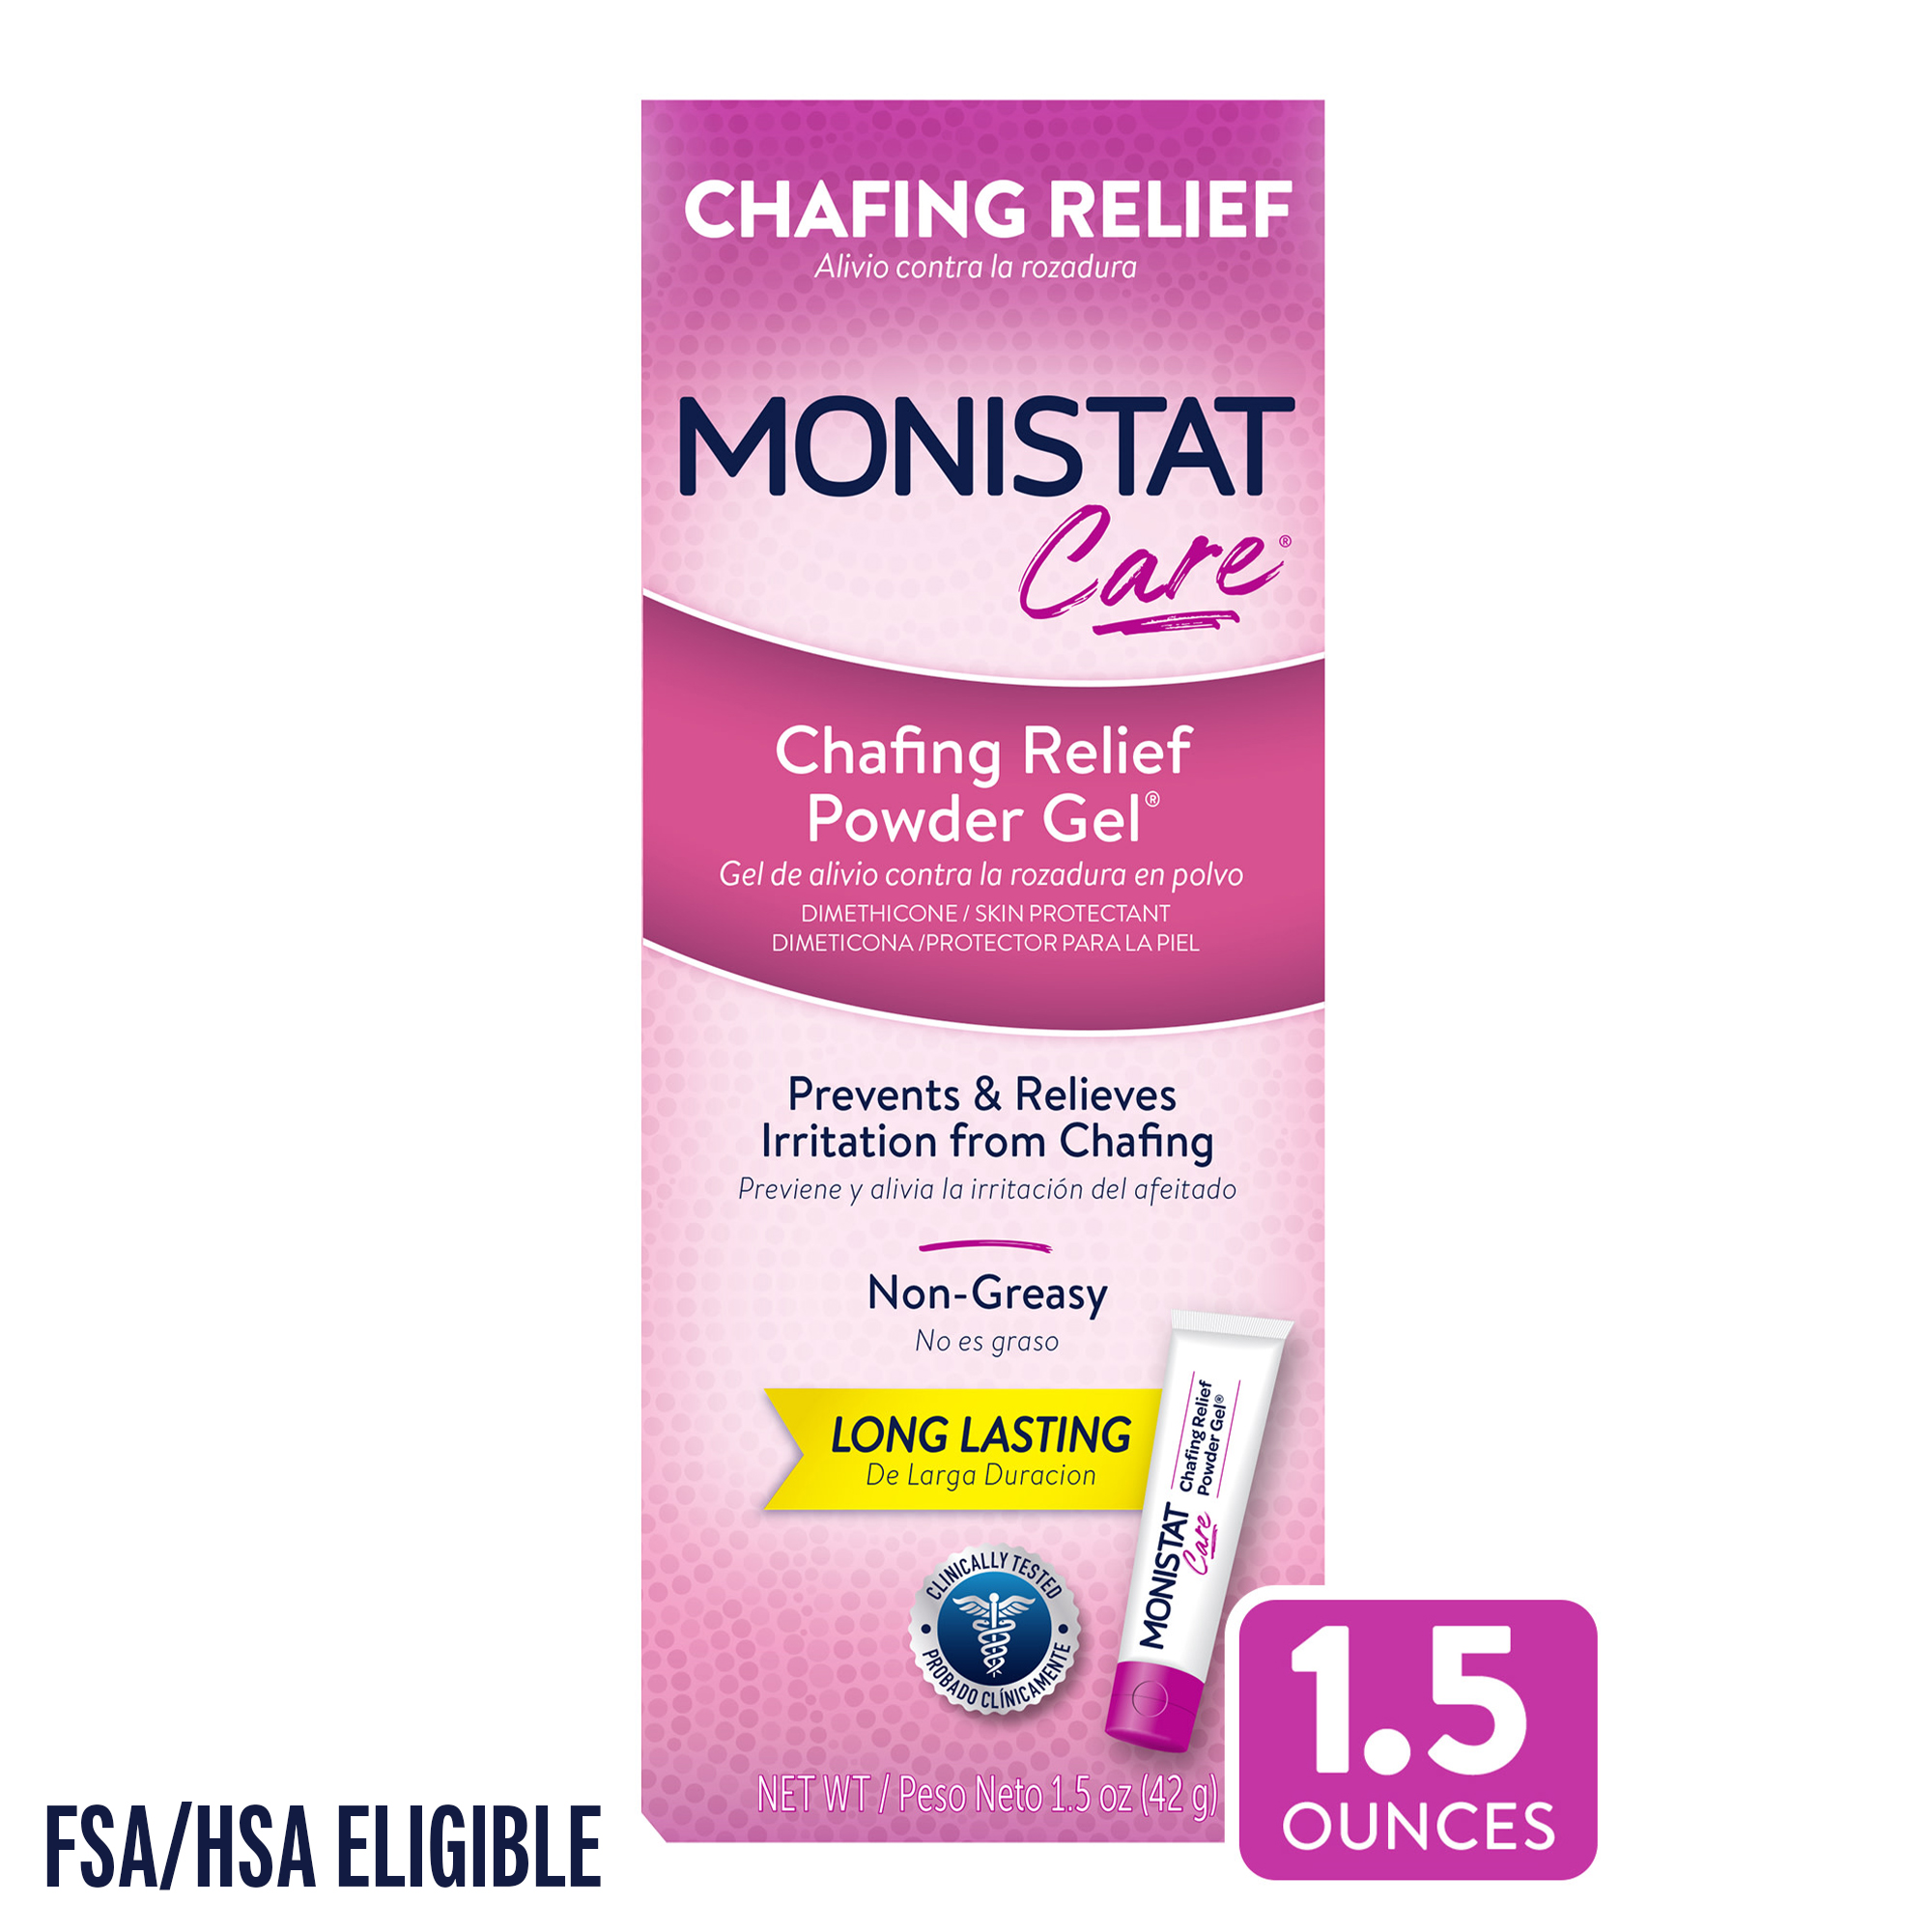 Monistat Chafing Relief Powder Gel, Anti-Chafe Protection, Fragrance Free, 1.5 Oz - image 1 of 13